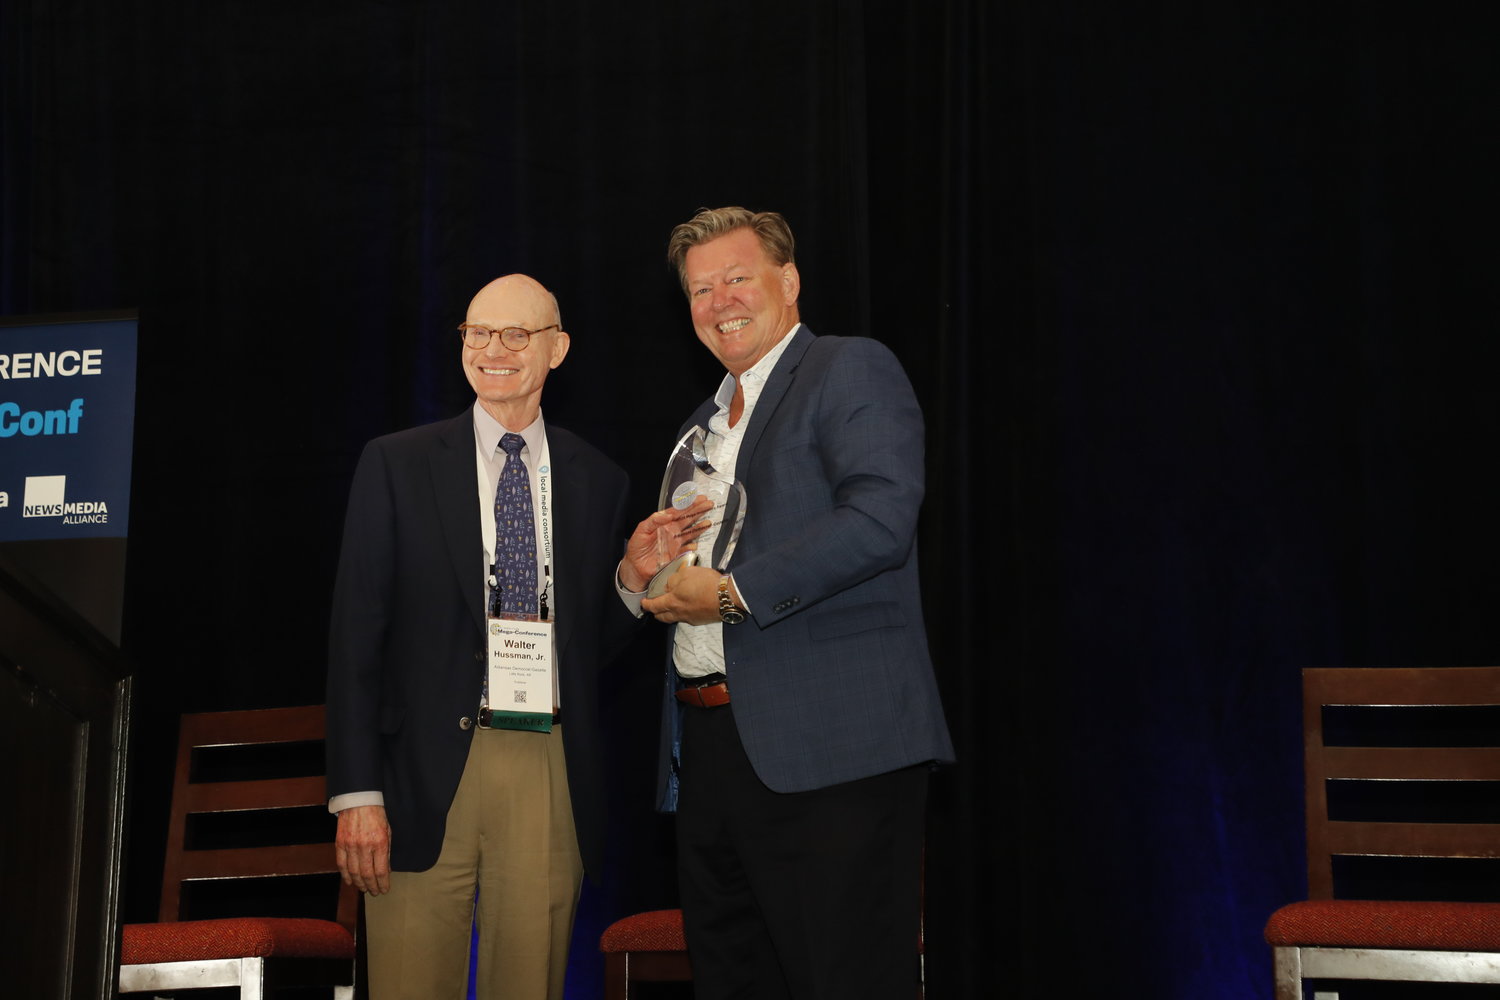 Dave Kennedy, of the Honolulu Star-Advertiser and 2018 recipient of the Mega-Innovation Award, presents Walter E. Hussman Jr., of the Arkansas Democrat-Gazette, with this year's Mega-Innovation Award. (Photo by Bob Booth)